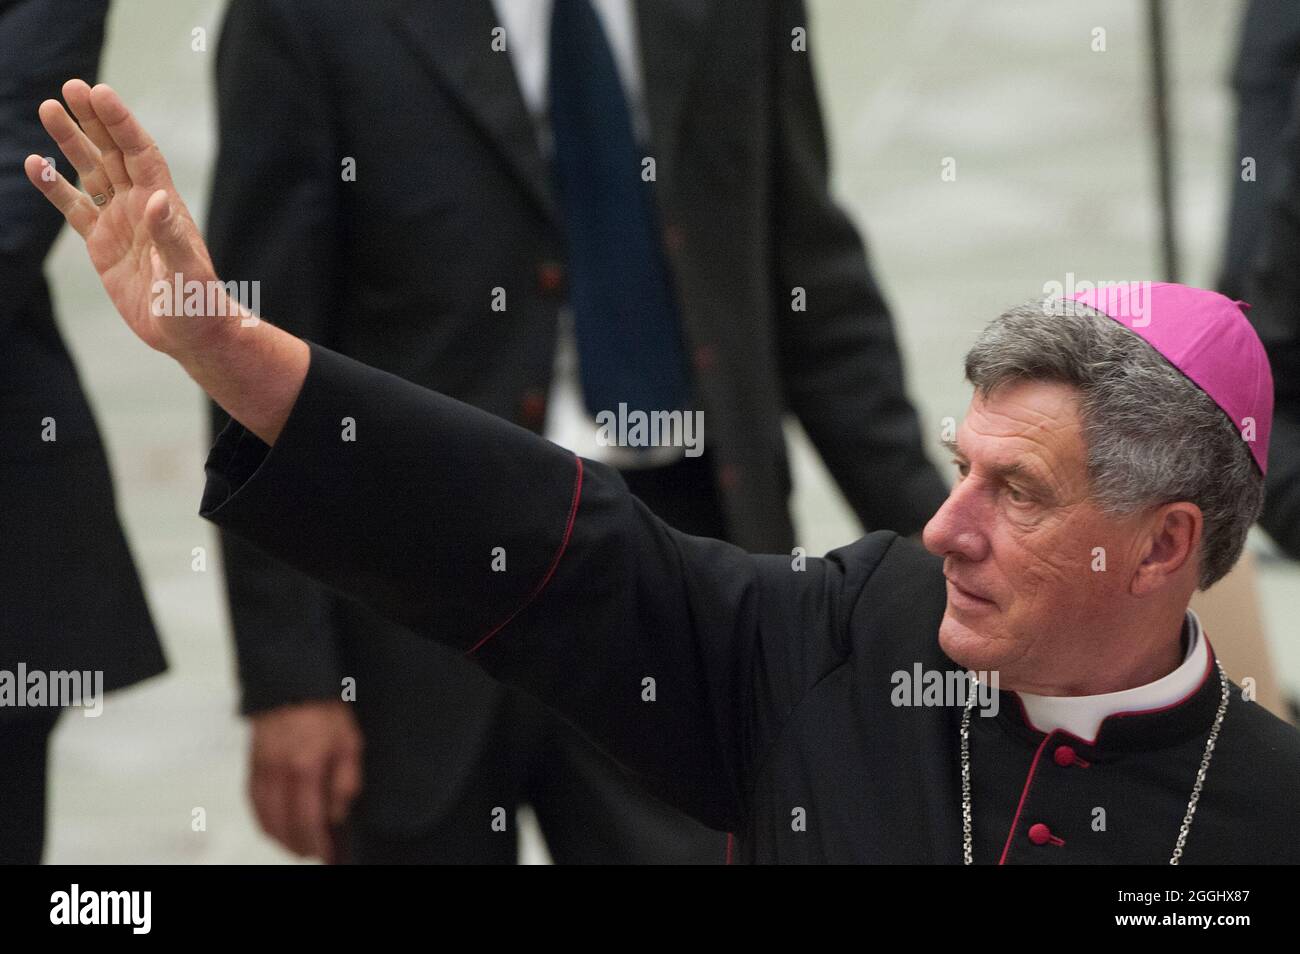 Bishop Gestures High Resolution Stock Photography and Images - Alamy